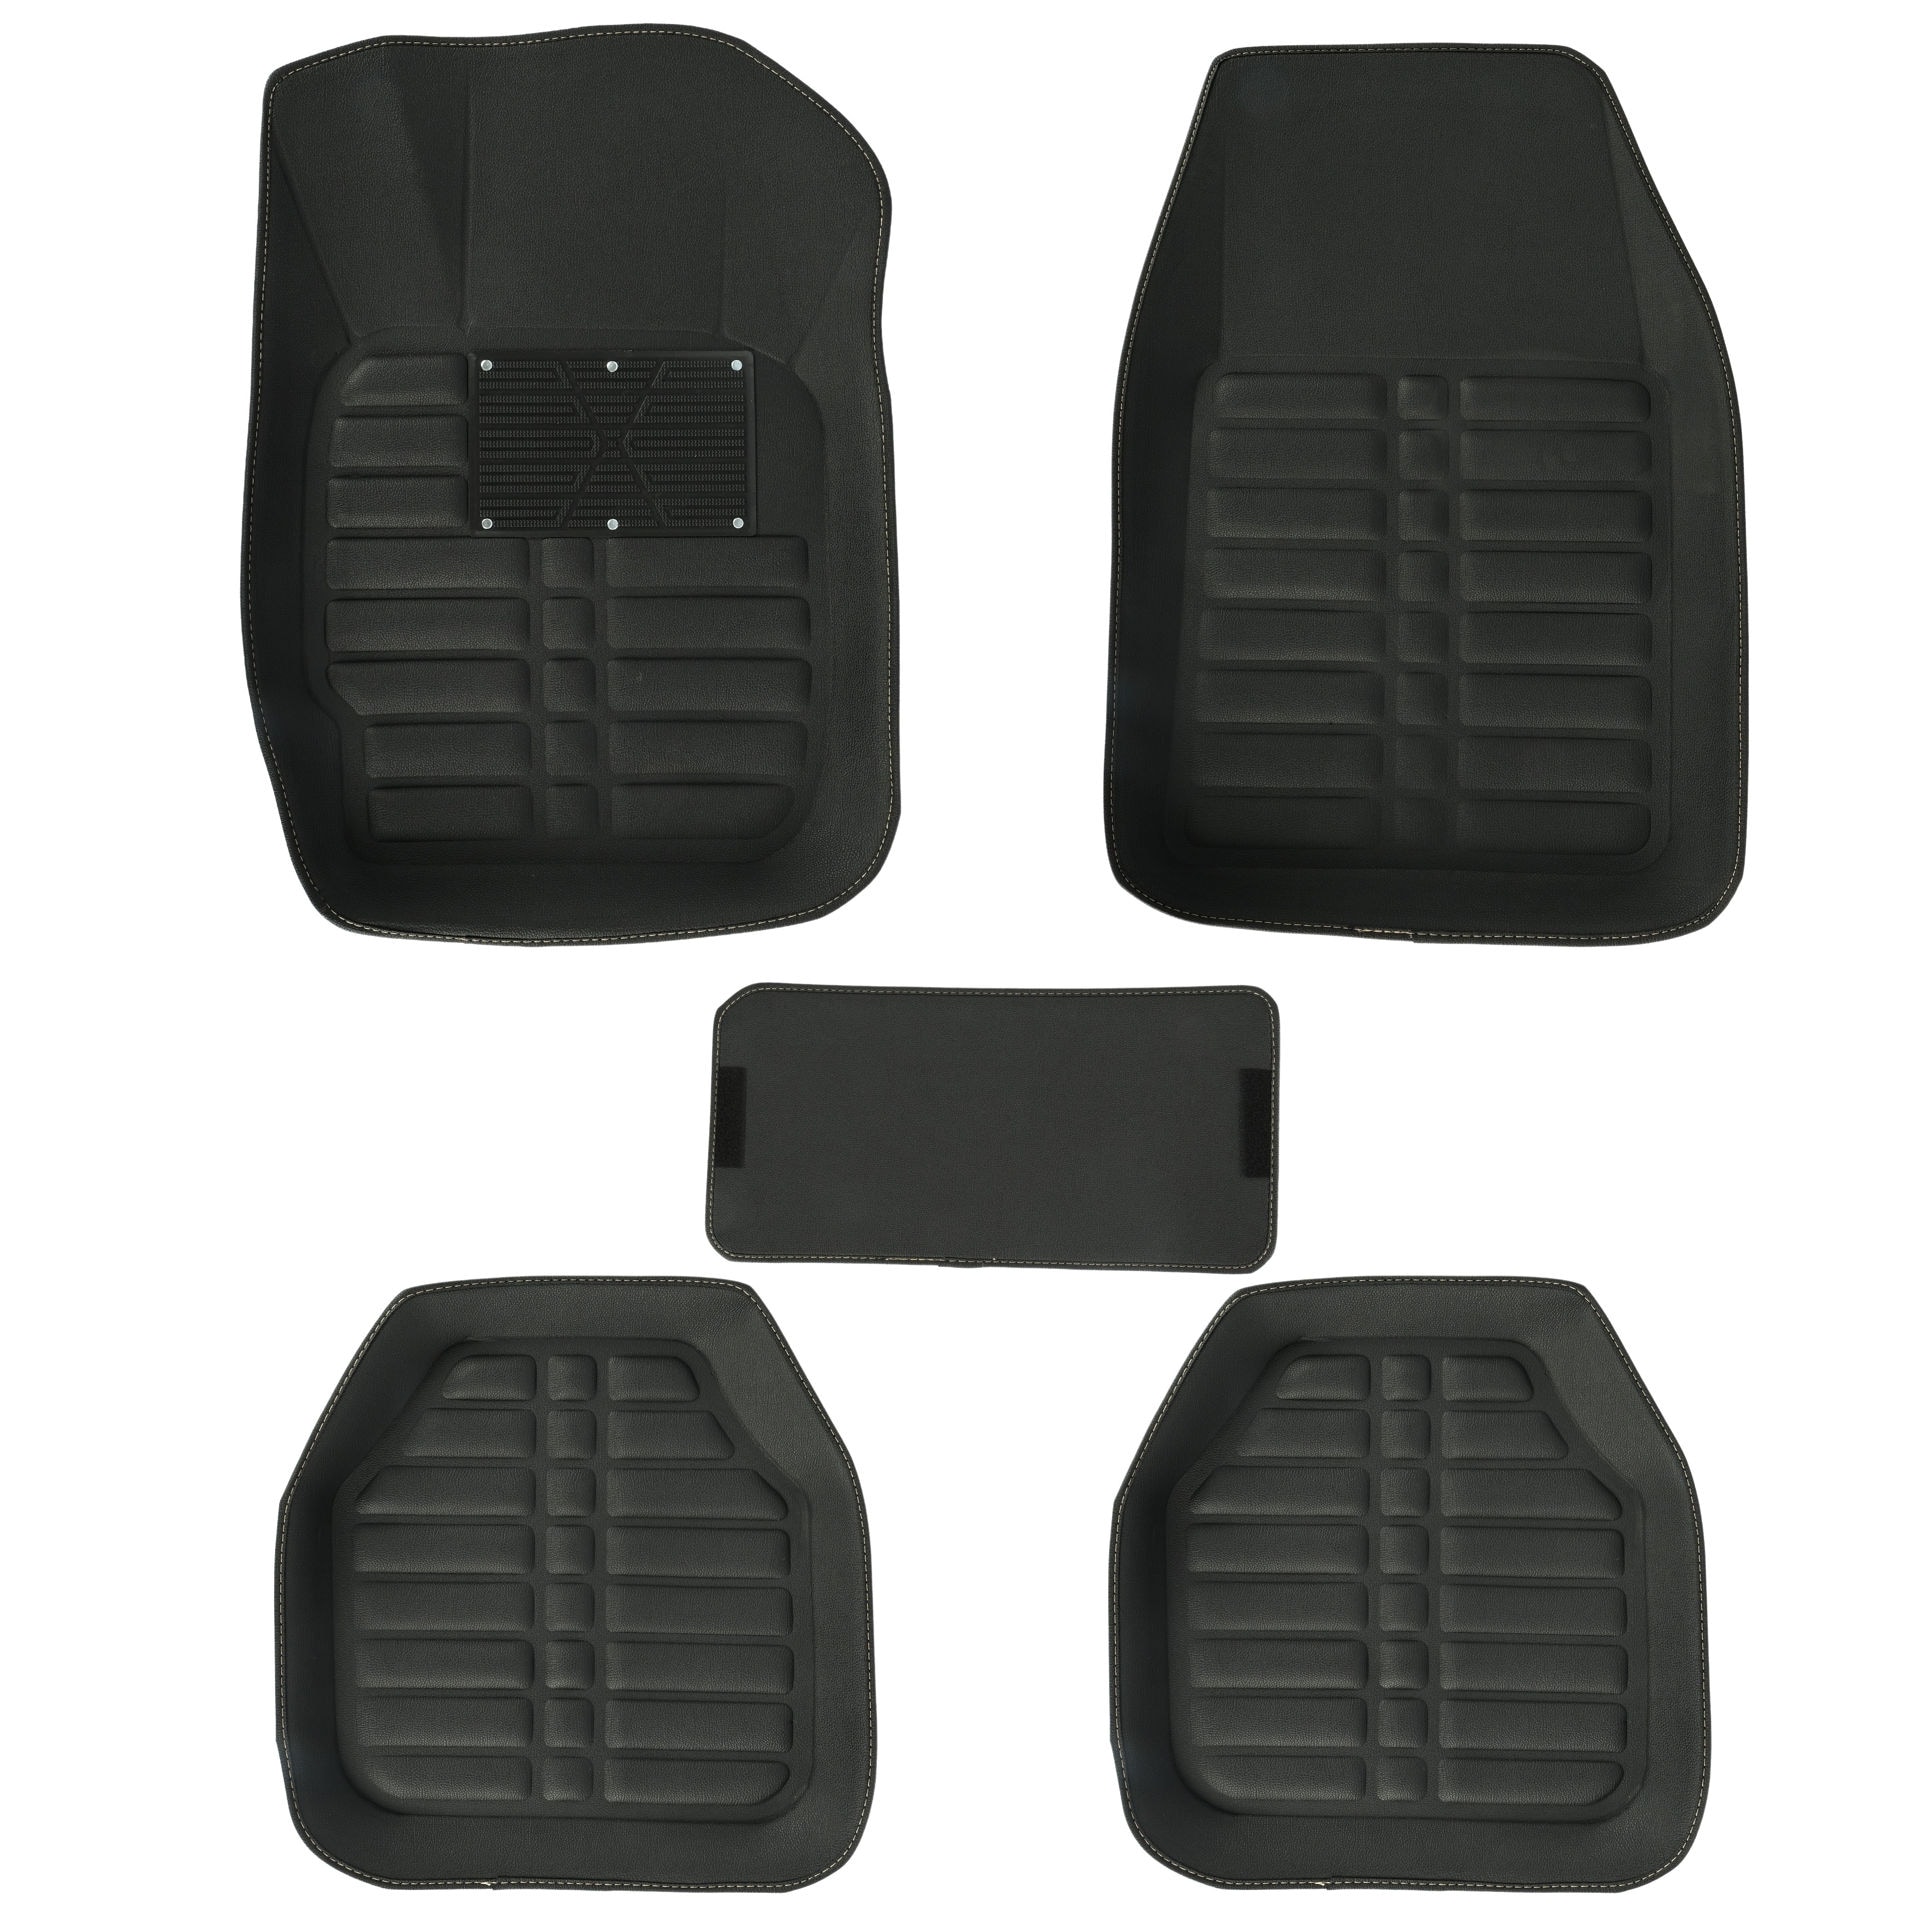 https://assets.dragonmart.ae//pictures/0770165_rubber-universal-size-floor-mat-for-cars-with-pedals-black-set-of-5.jpeg